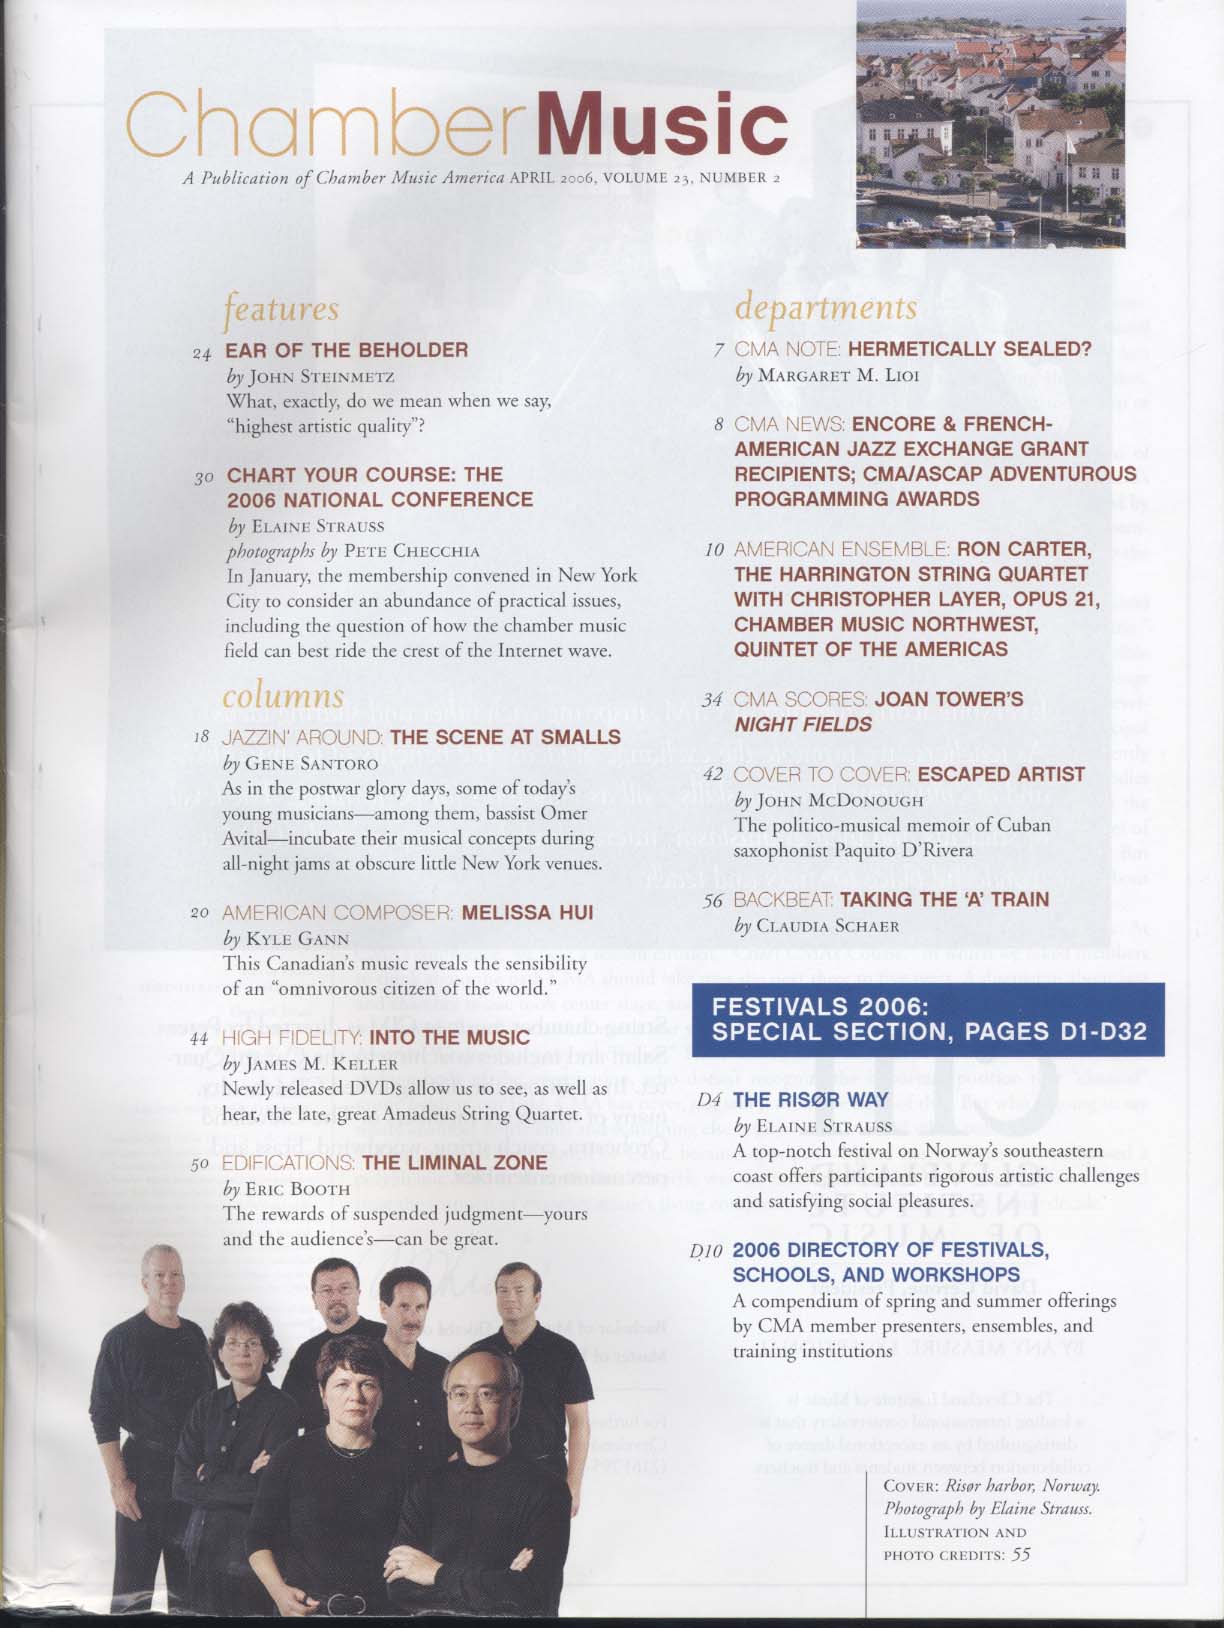 ChamberMusicAmerica Mar.2006 2.table of contents.jpg